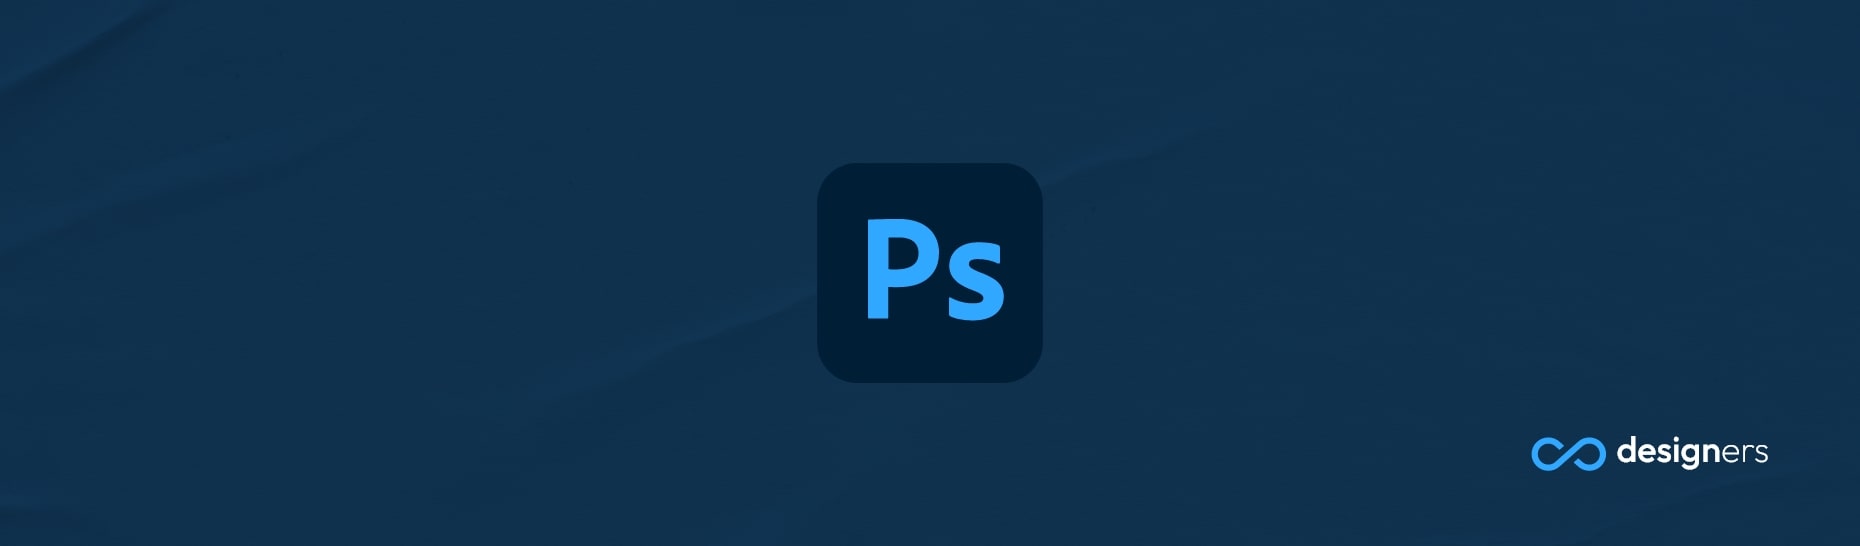 What is 1920×1080 pixels in Photoshop?